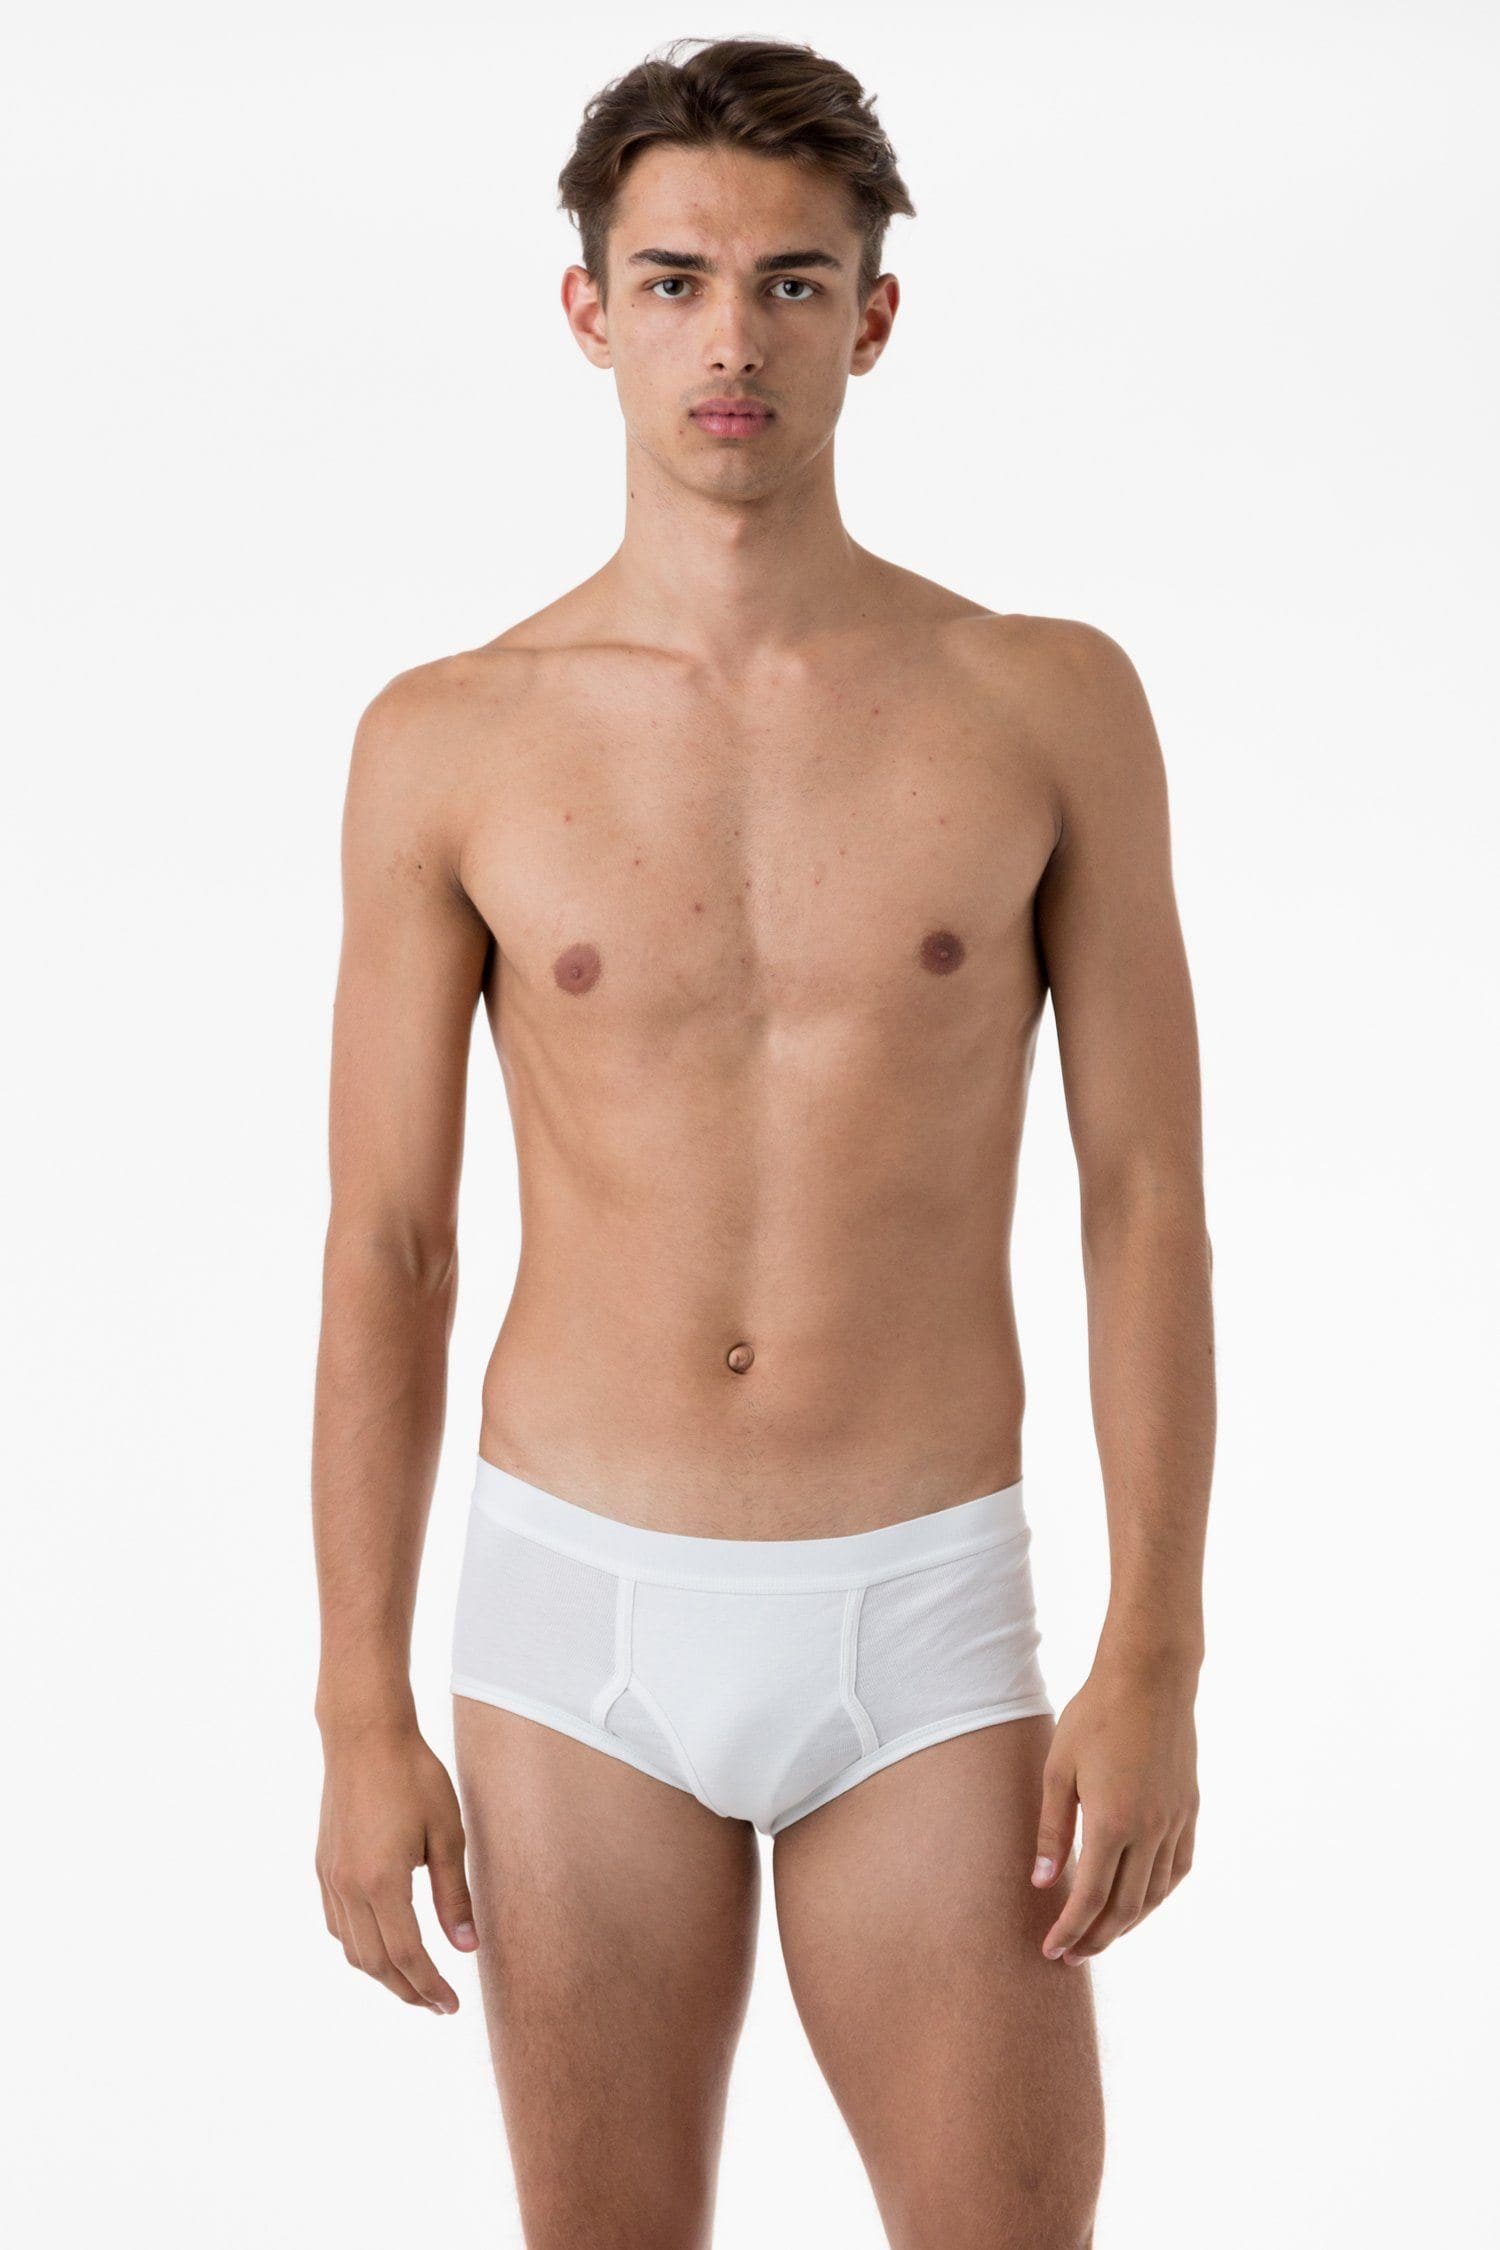 American Apparel Men's Rib Boxer Brief, Baby Blue, Small : :  Clothing, Shoes & Accessories